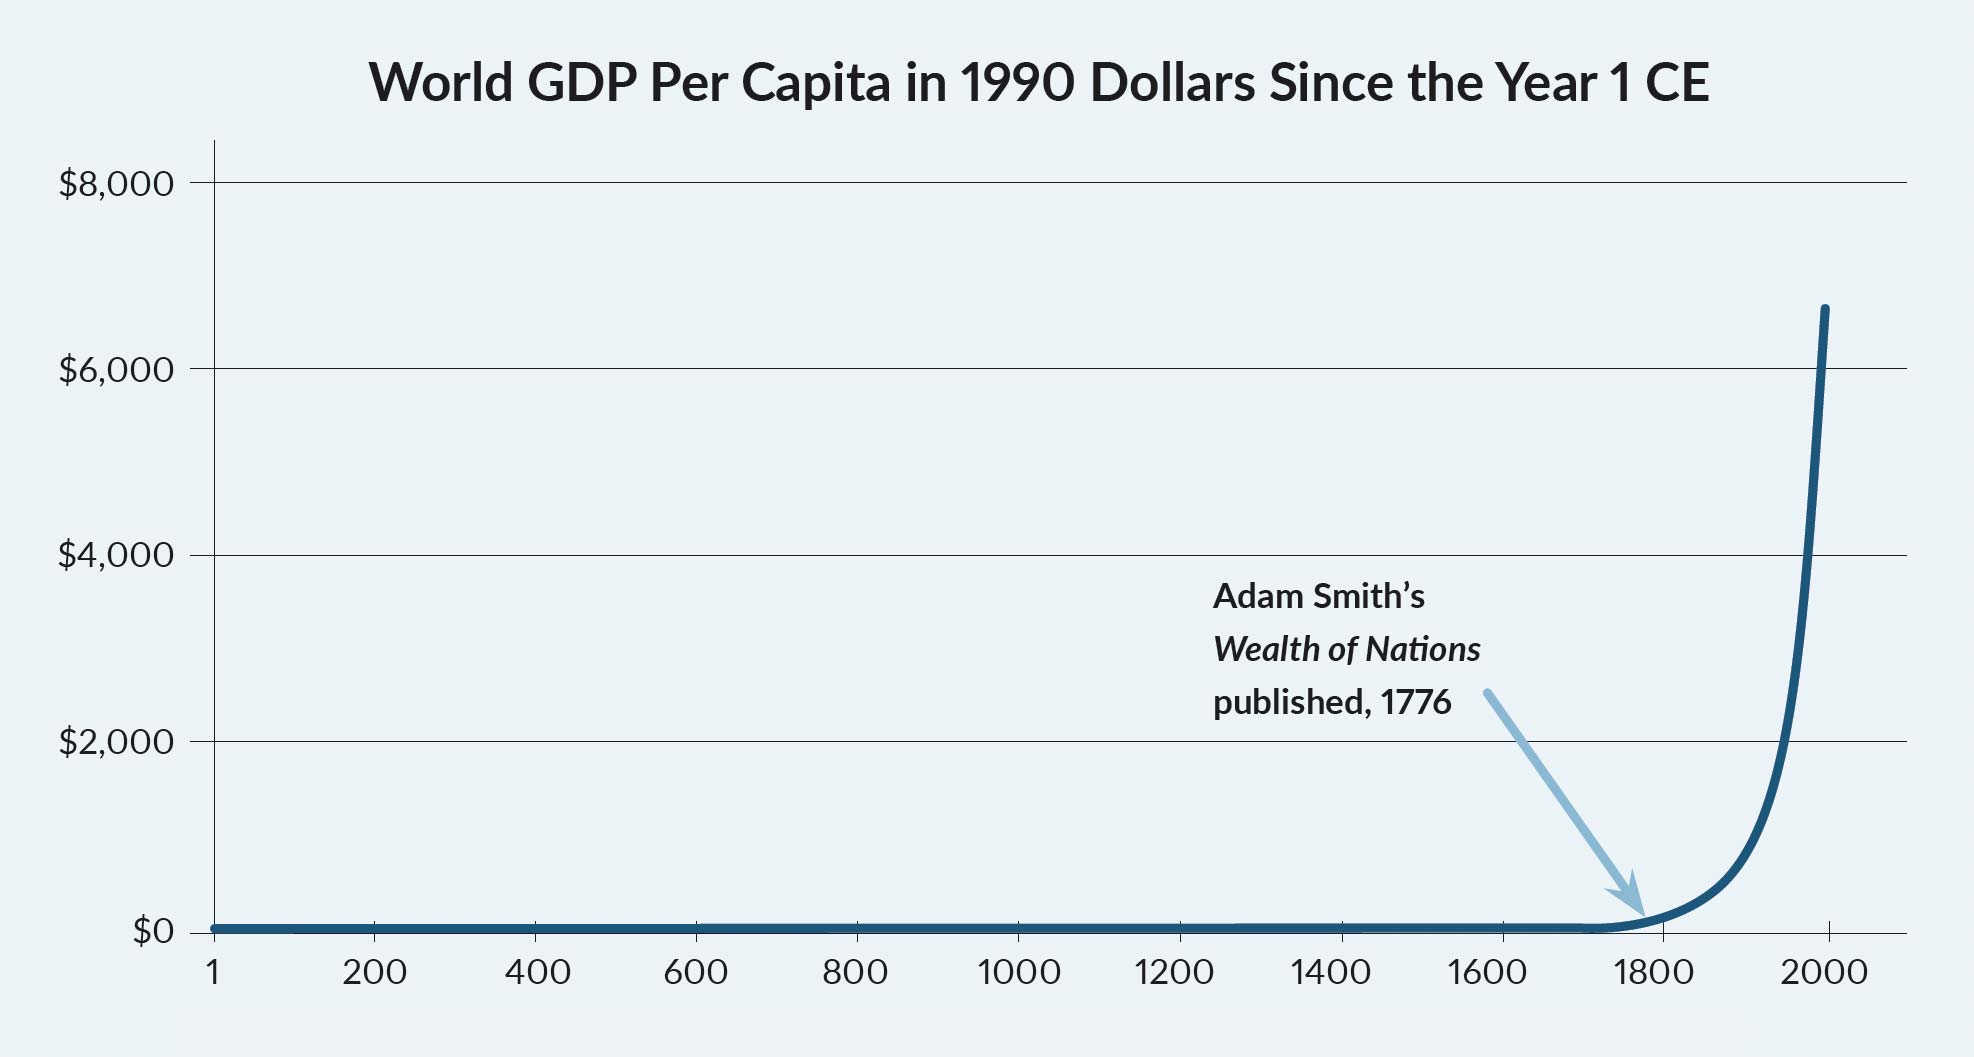 World GDP Per Capita in 1990 Dollars Since the Year 1 CE